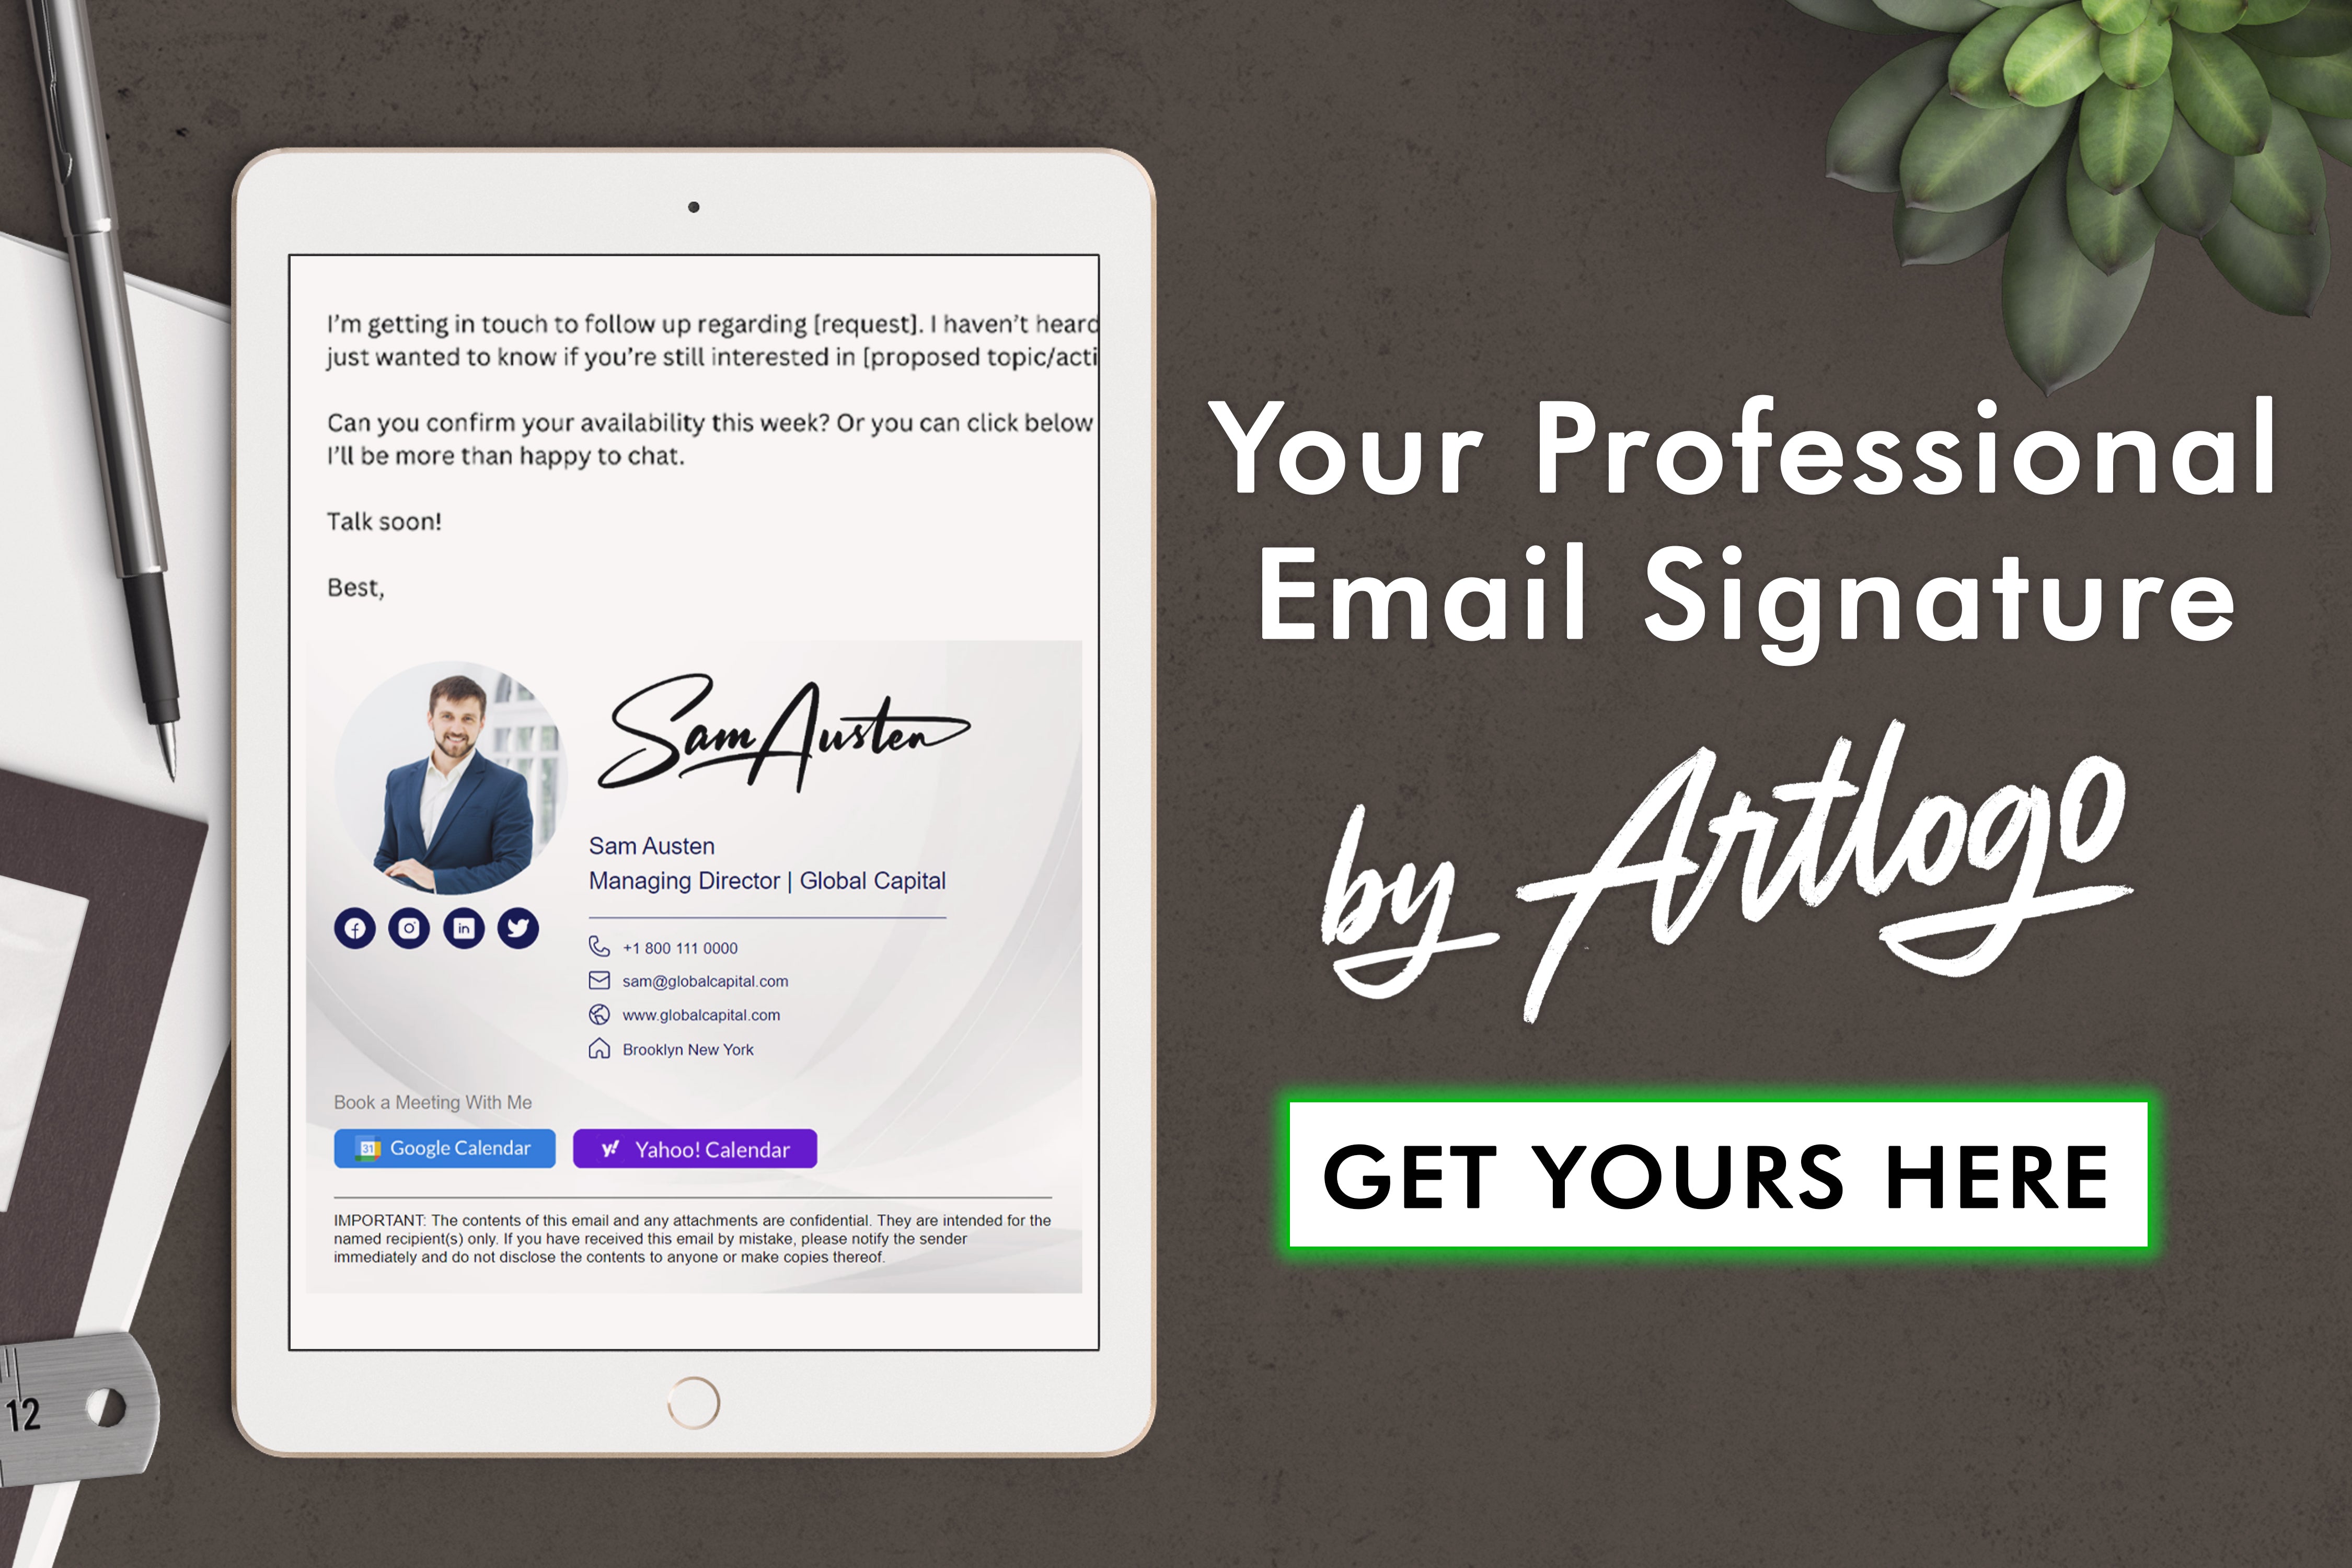 Dive into the world of email signatures and learn how to craft a unique and professional signature that sets you apart in the digital space.